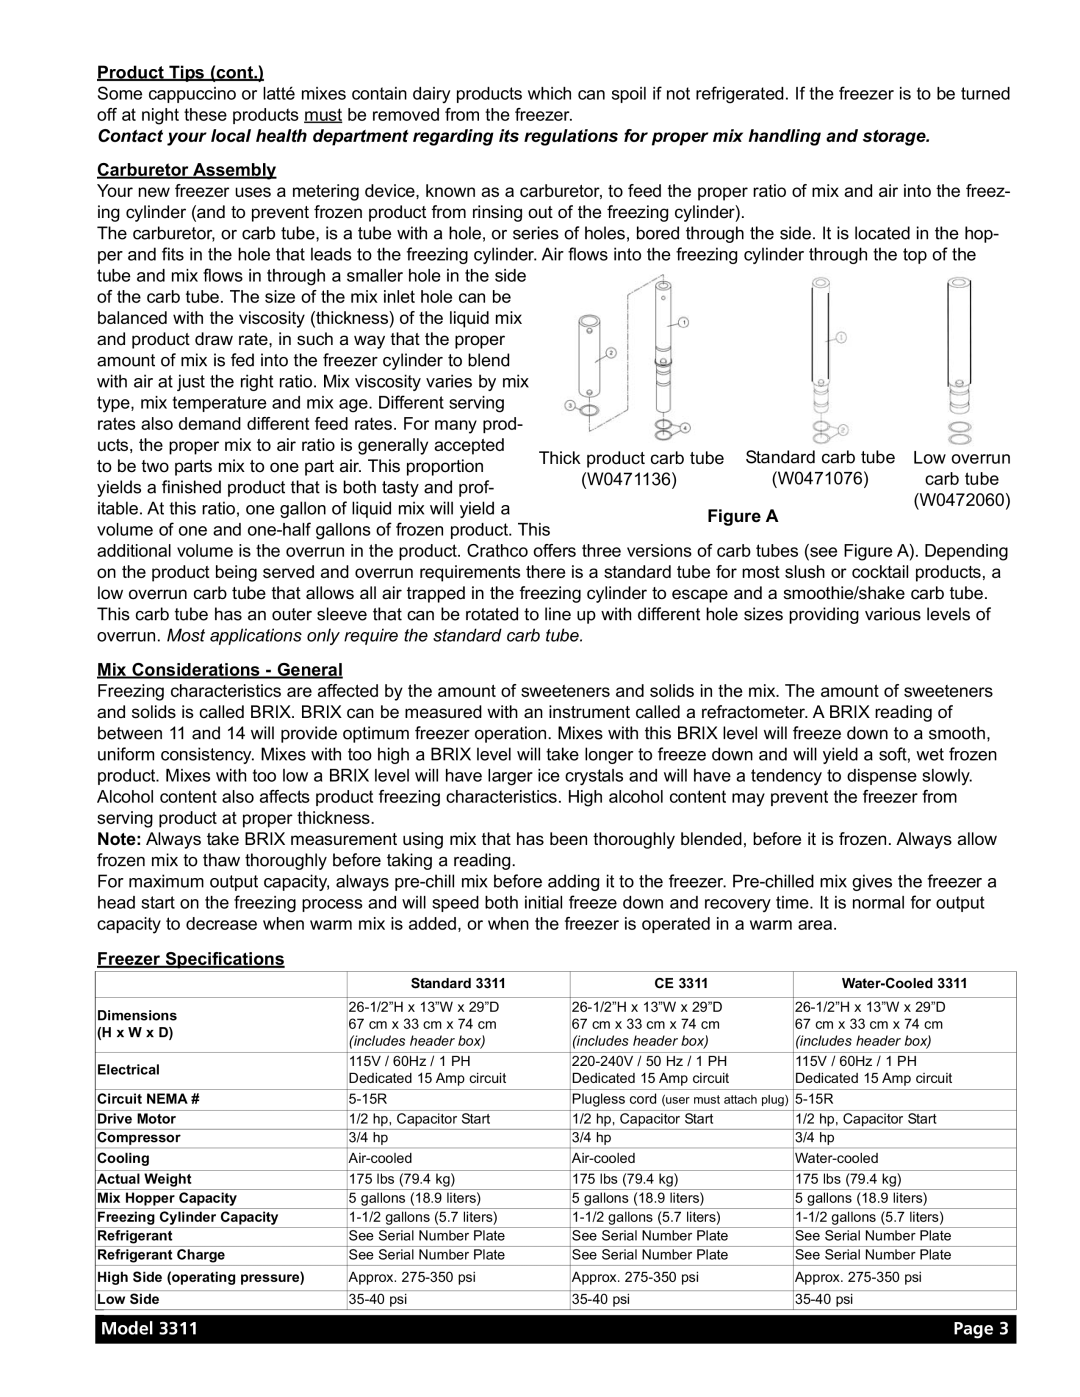 Grindmaster Model 3311 manual Product Tips cont, Carburetor Assembly, Figure A, Mix Considerations - General, Page 